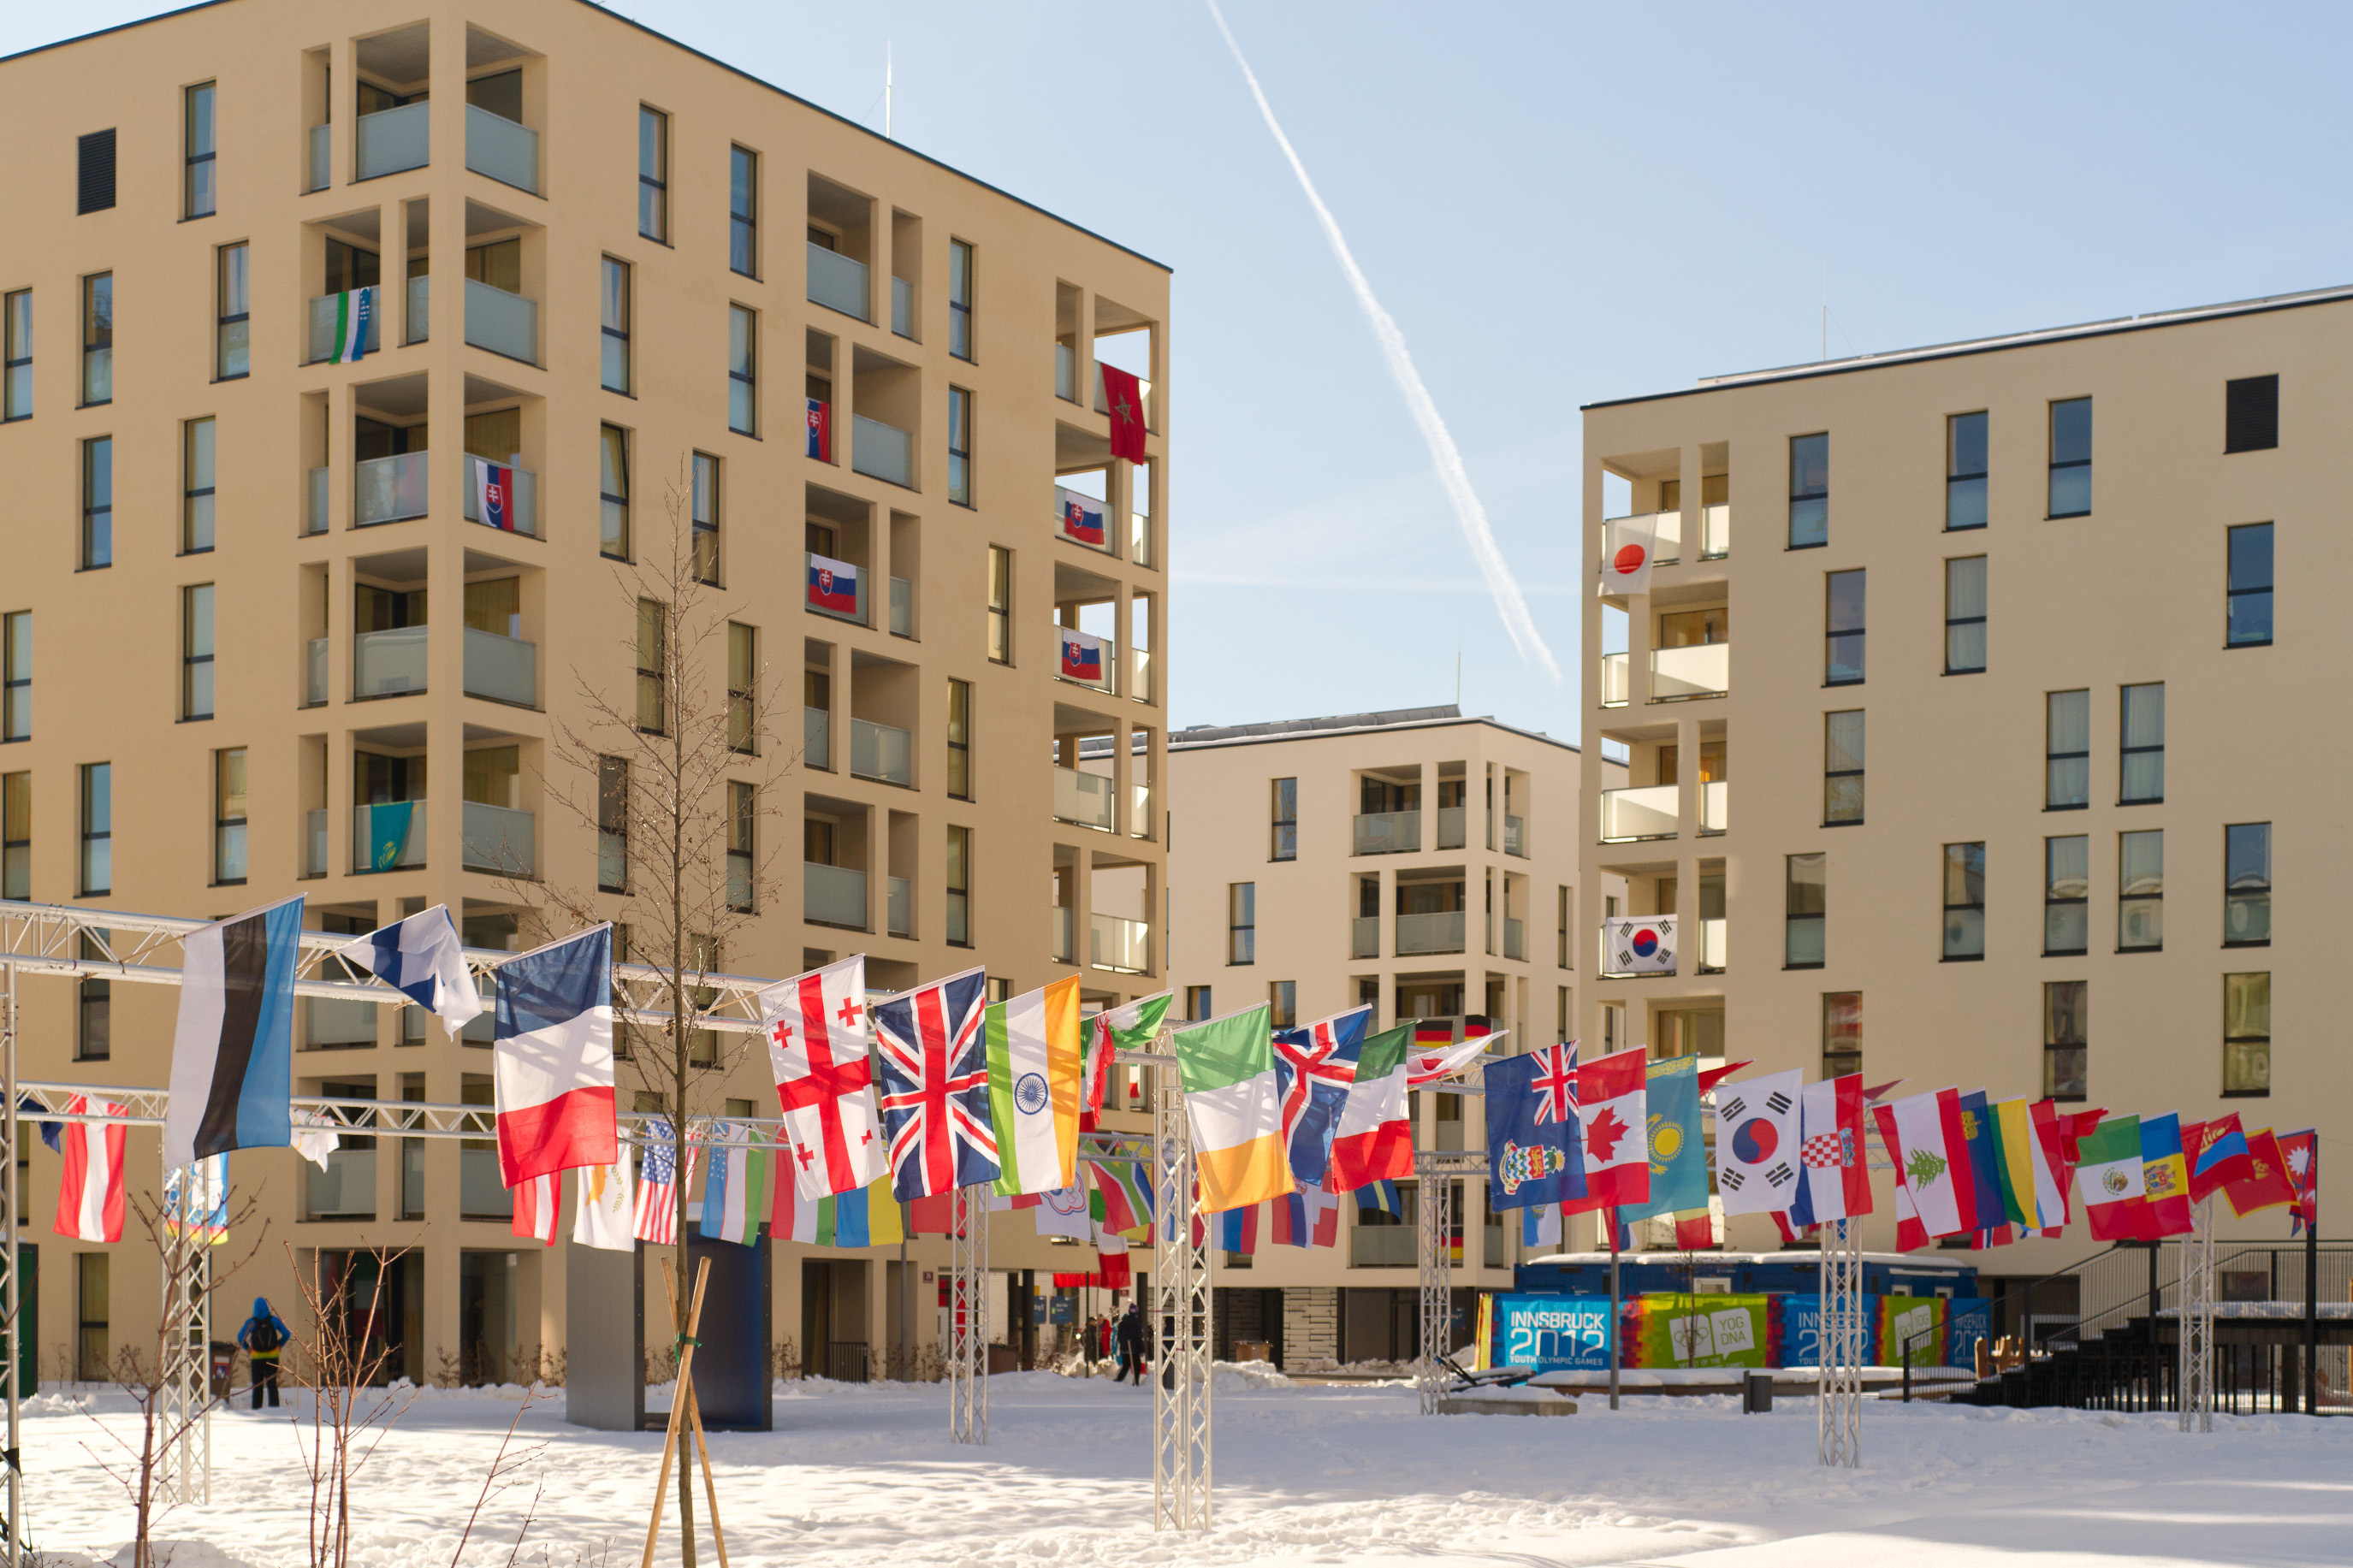 Guided Tour Youth Olympic Village at Jan 11th as part of the Innsbruck 2012 YOG